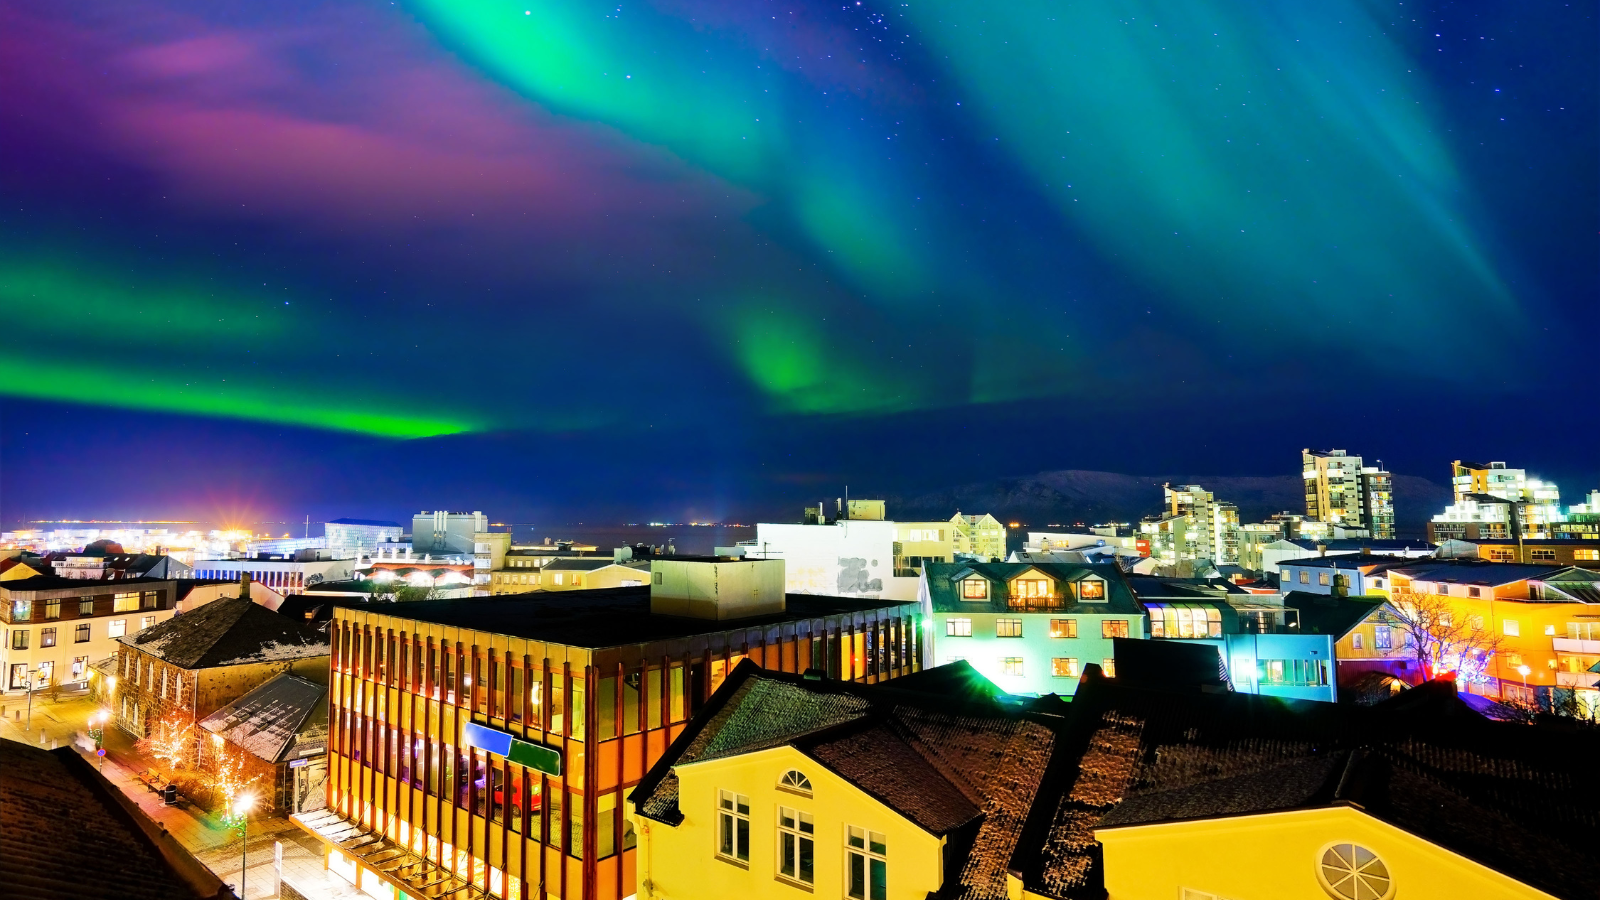 Northern Lights seen from the city centre in Reykjavík.